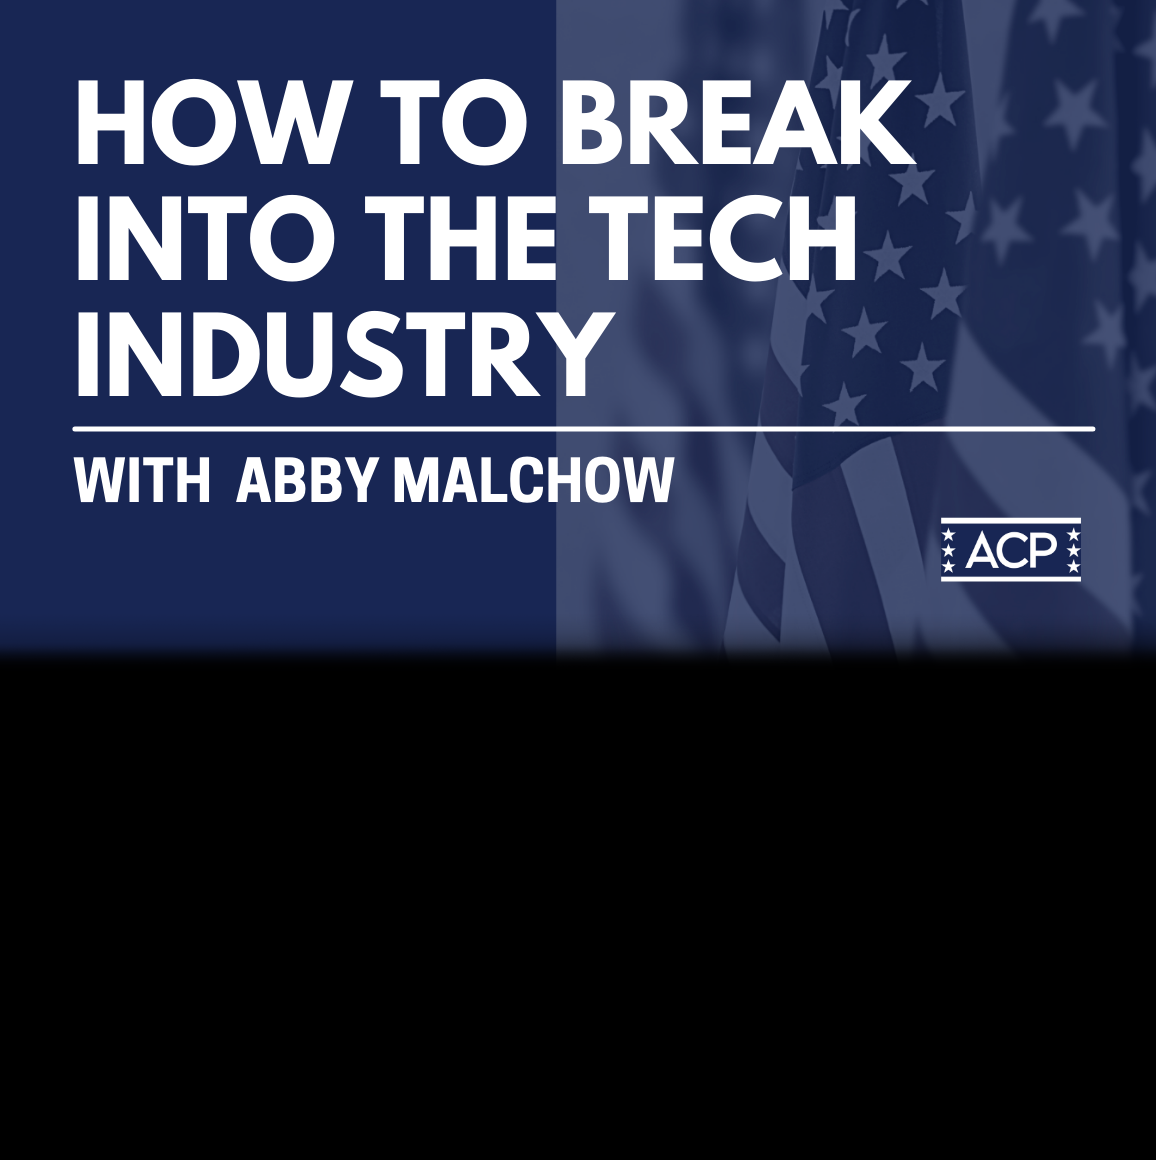 How To Break Into the Tech Industry